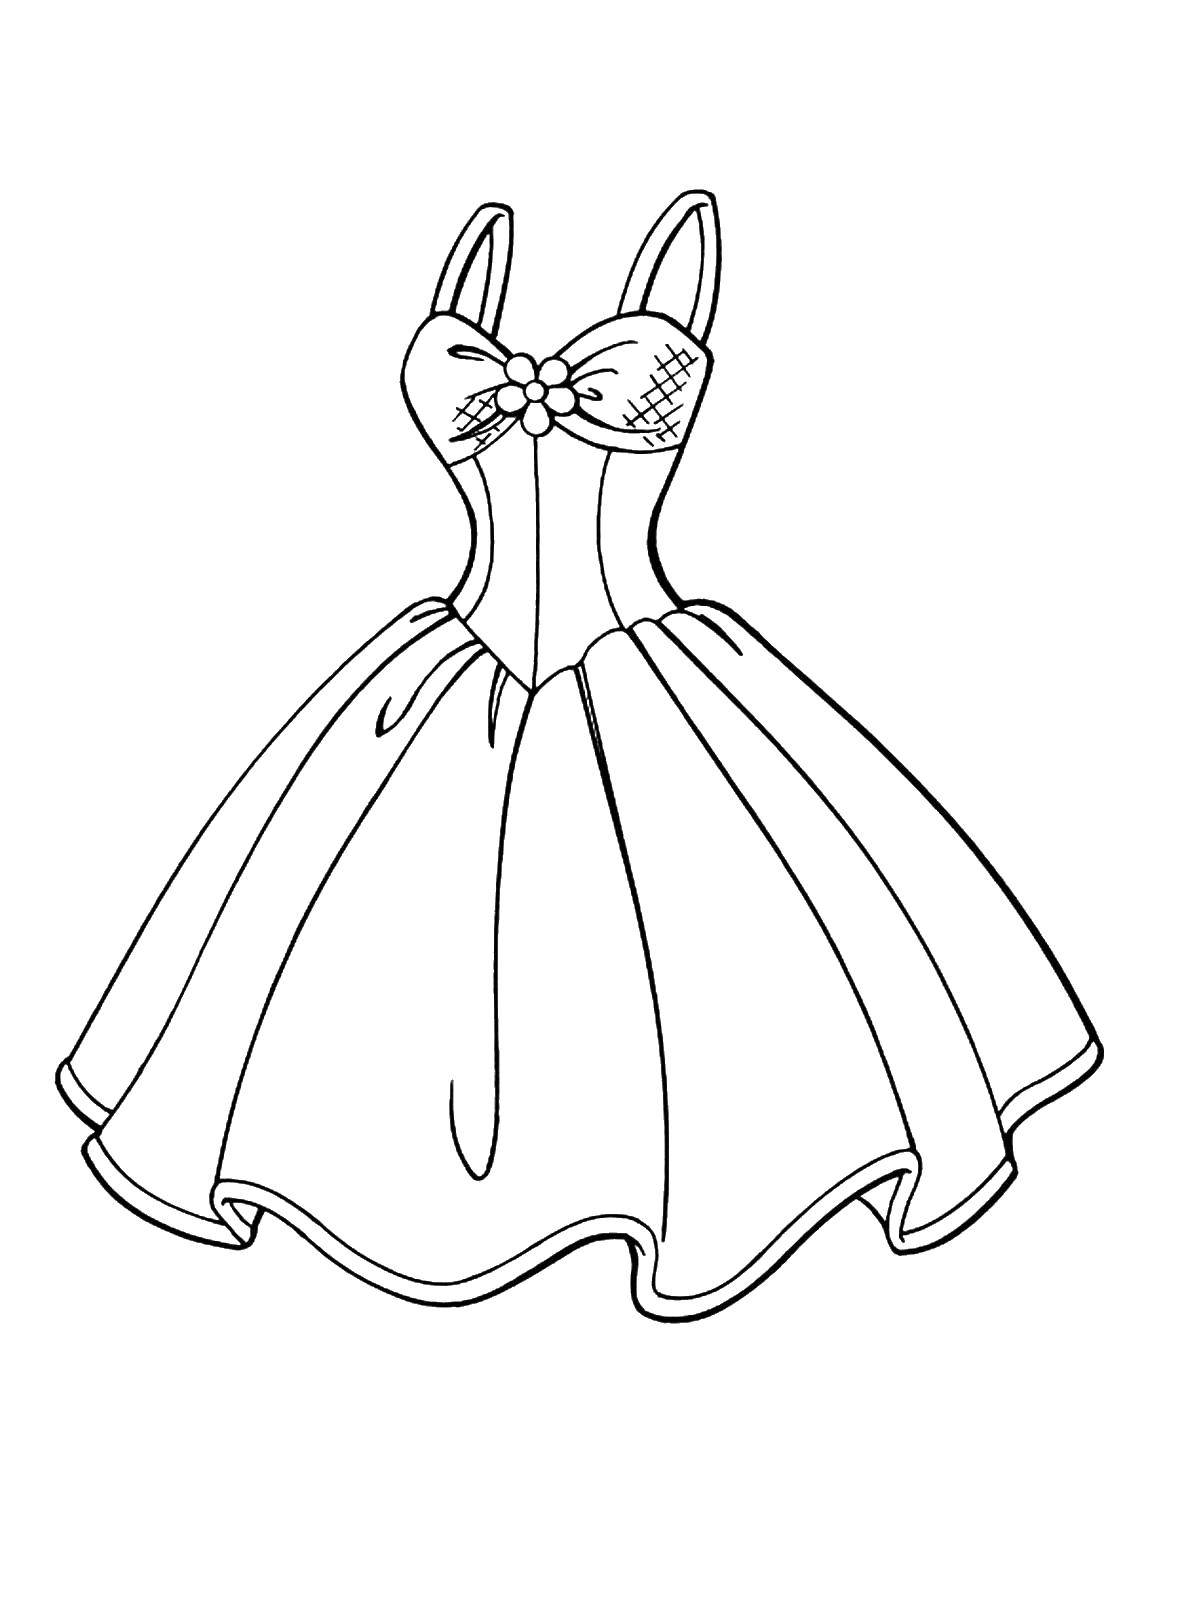 Coloring Quinceanera dresses with flower. Category clothing. Tags:  Clothing, dress, flower.